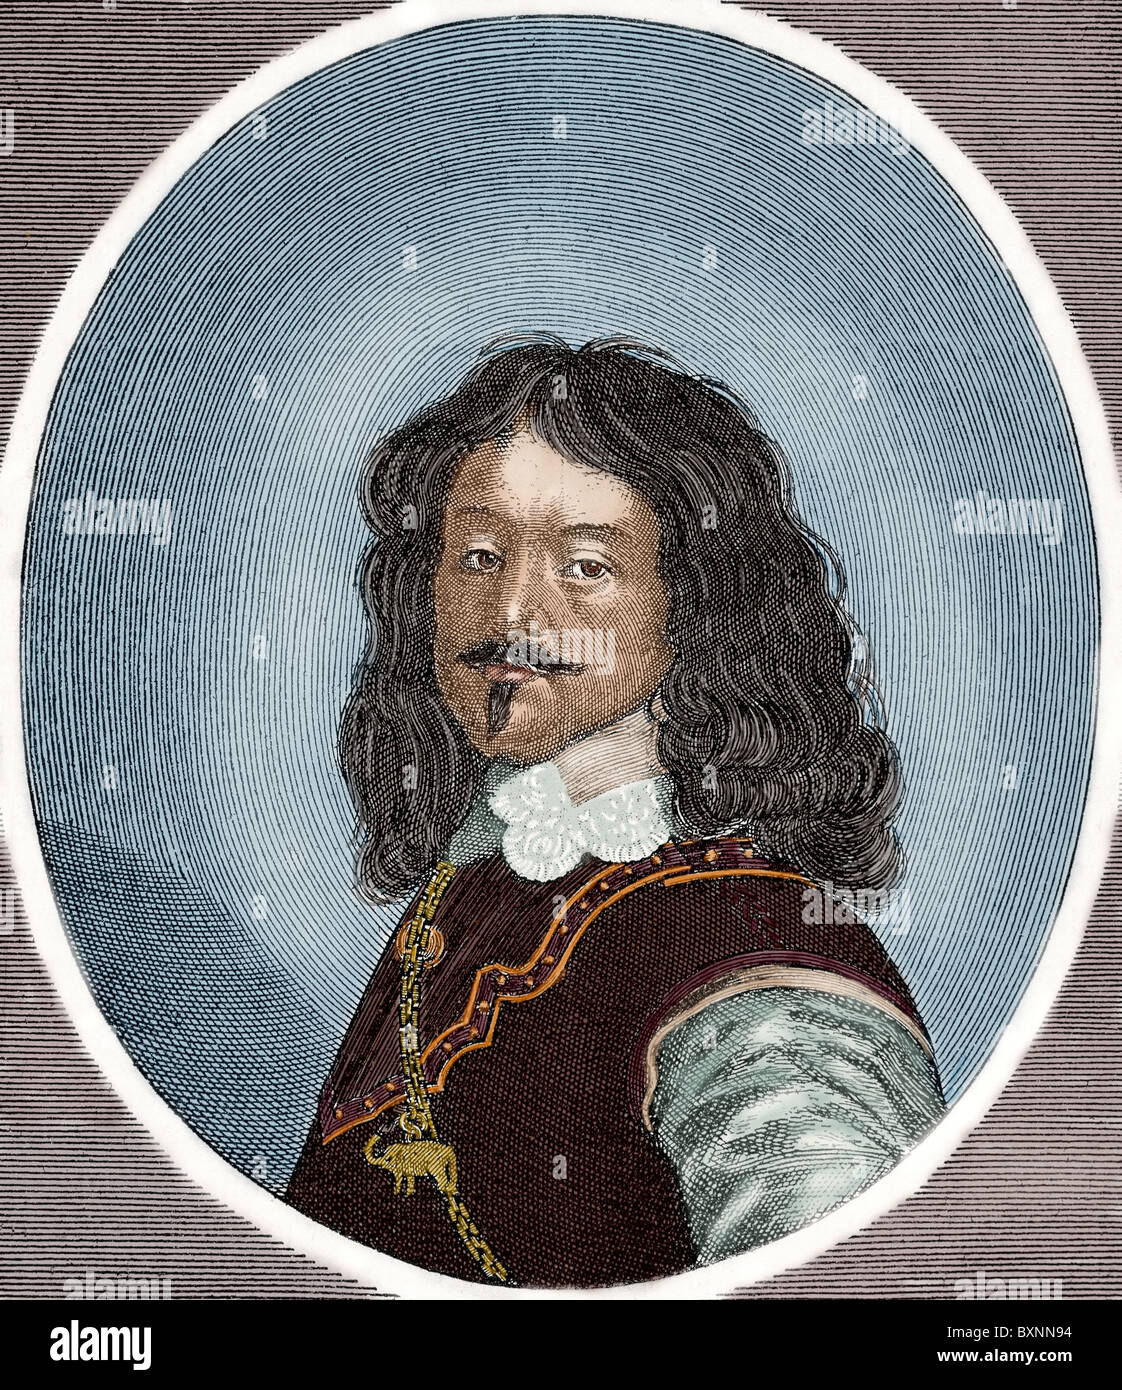 Frederick III (1609-1670). King of Denmark and Norway from 1648 until his death. Colored engraving. Stock Photo